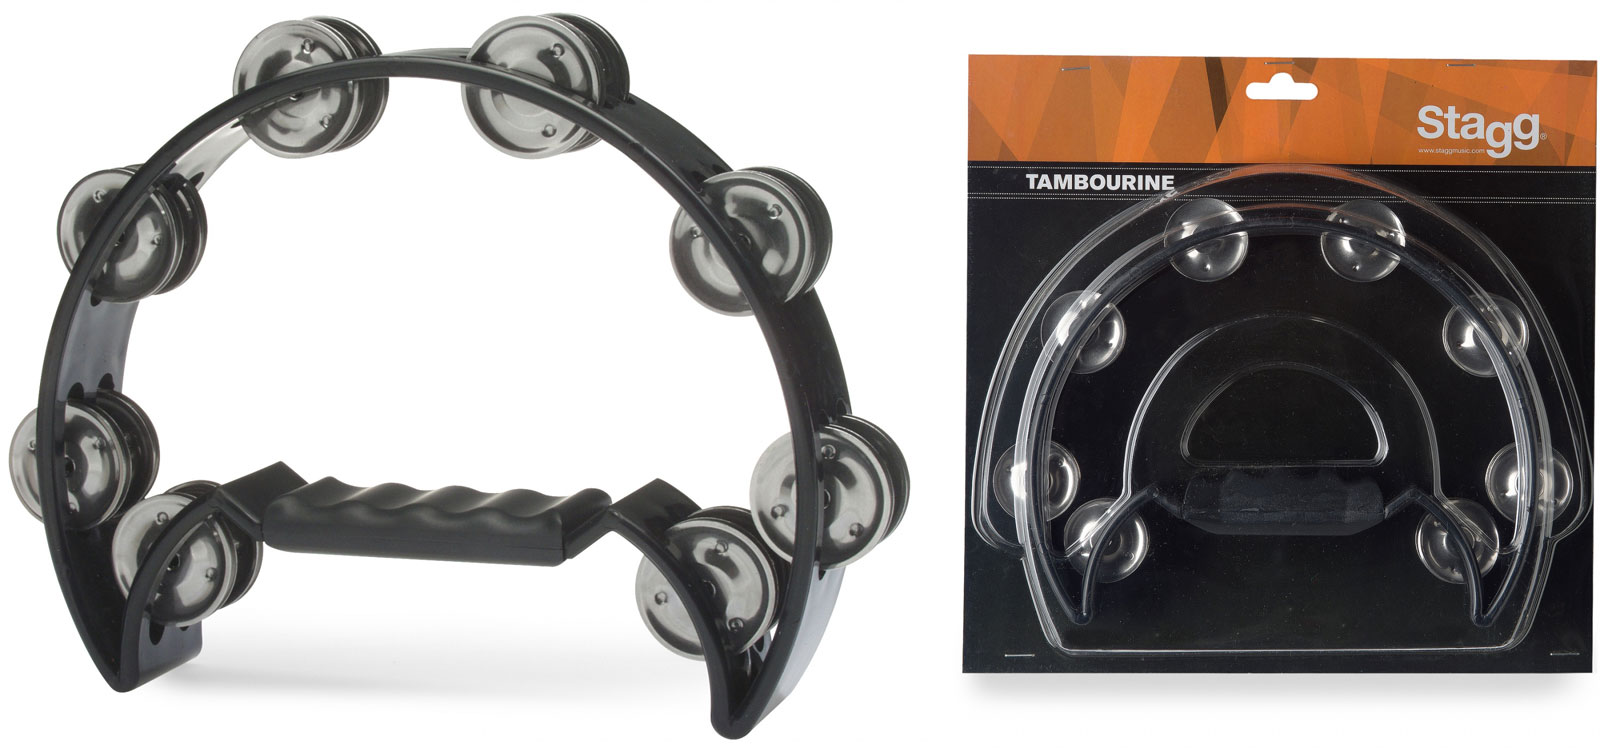 STAGG TAMBOURIN 1/2 LUNE 16 CYMBALETTES NOIR